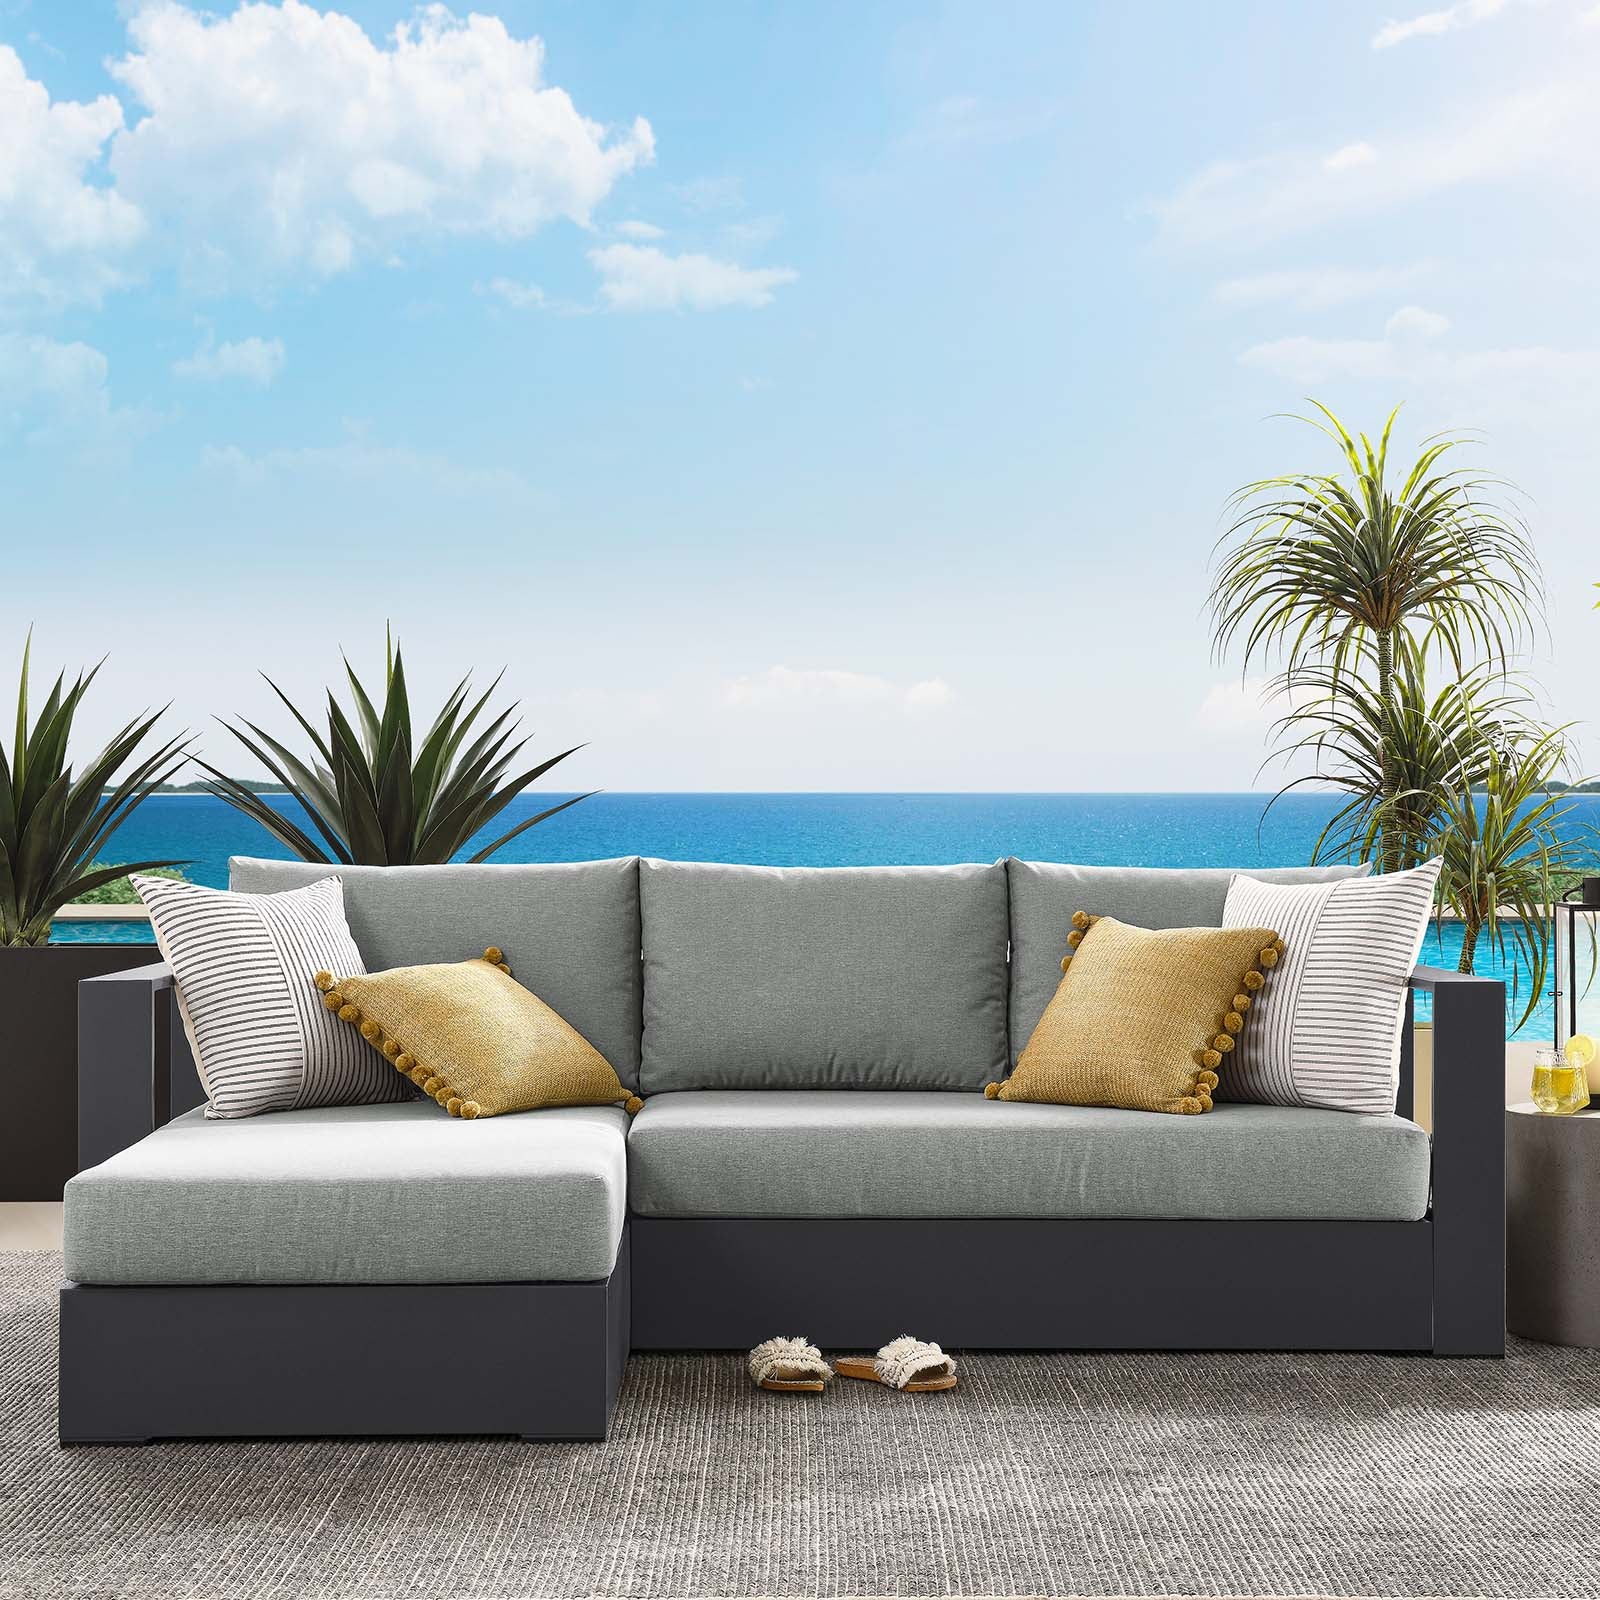 Tahoe Outdoor Patio Powder-Coated Aluminum 2-Piece Left-Facing Chaise Sectional Sofa Set - East Shore Modern Home Furnishings